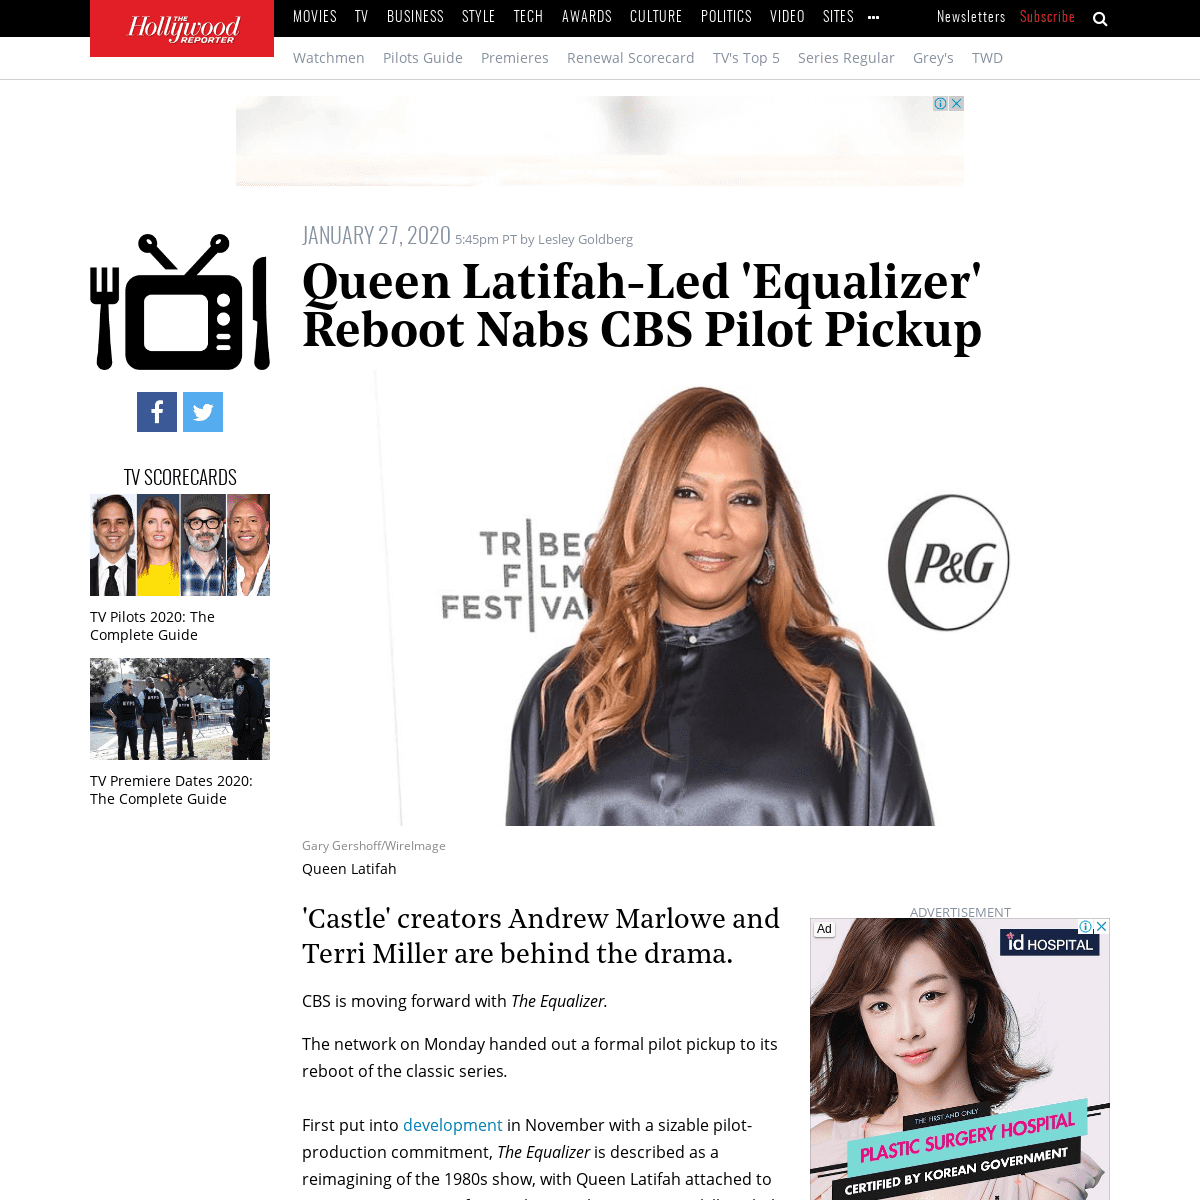 A complete backup of www.hollywoodreporter.com/live-feed/queen-latifah-led-equalizer-reboot-nabs-cbs-pilot-pickup-1273944